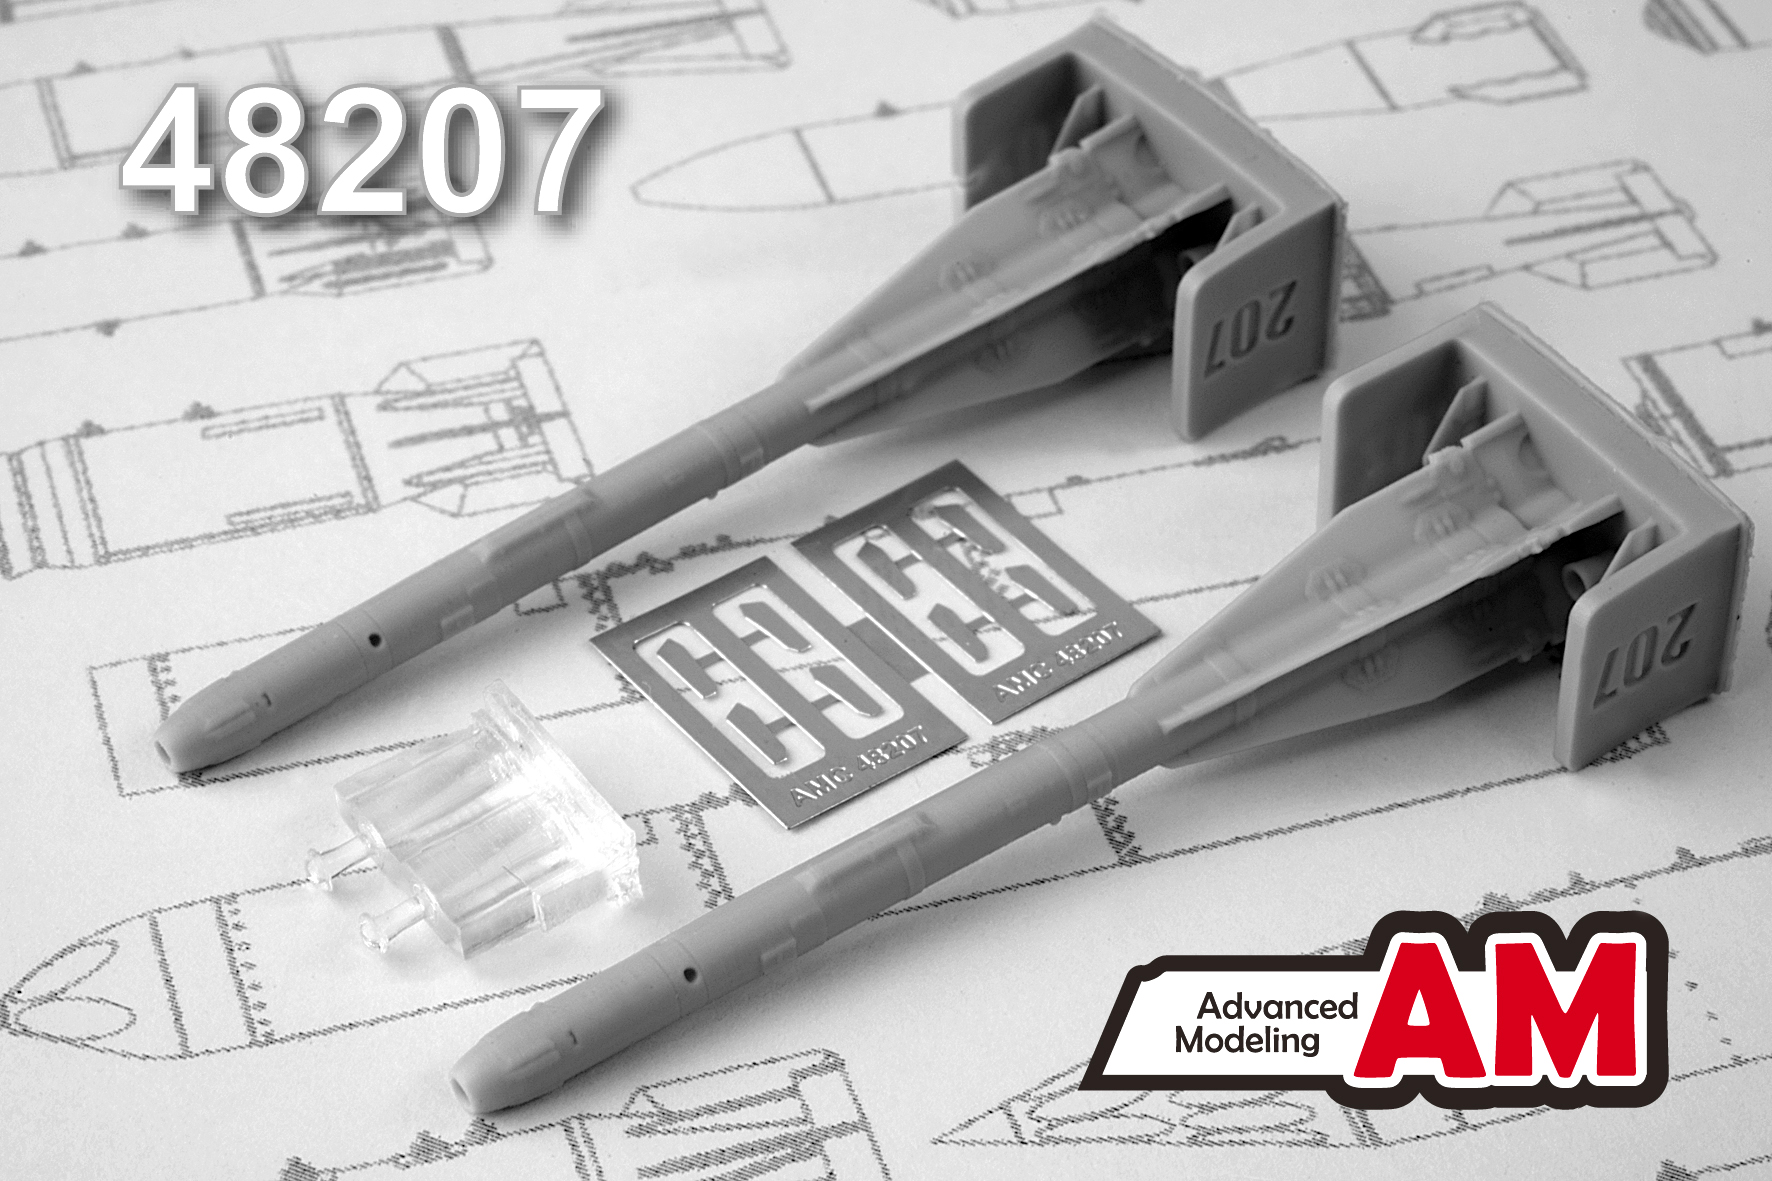 Additions (3D resin printing) 1/48 R-69 Air to Air missile (Advanced Modeling) 